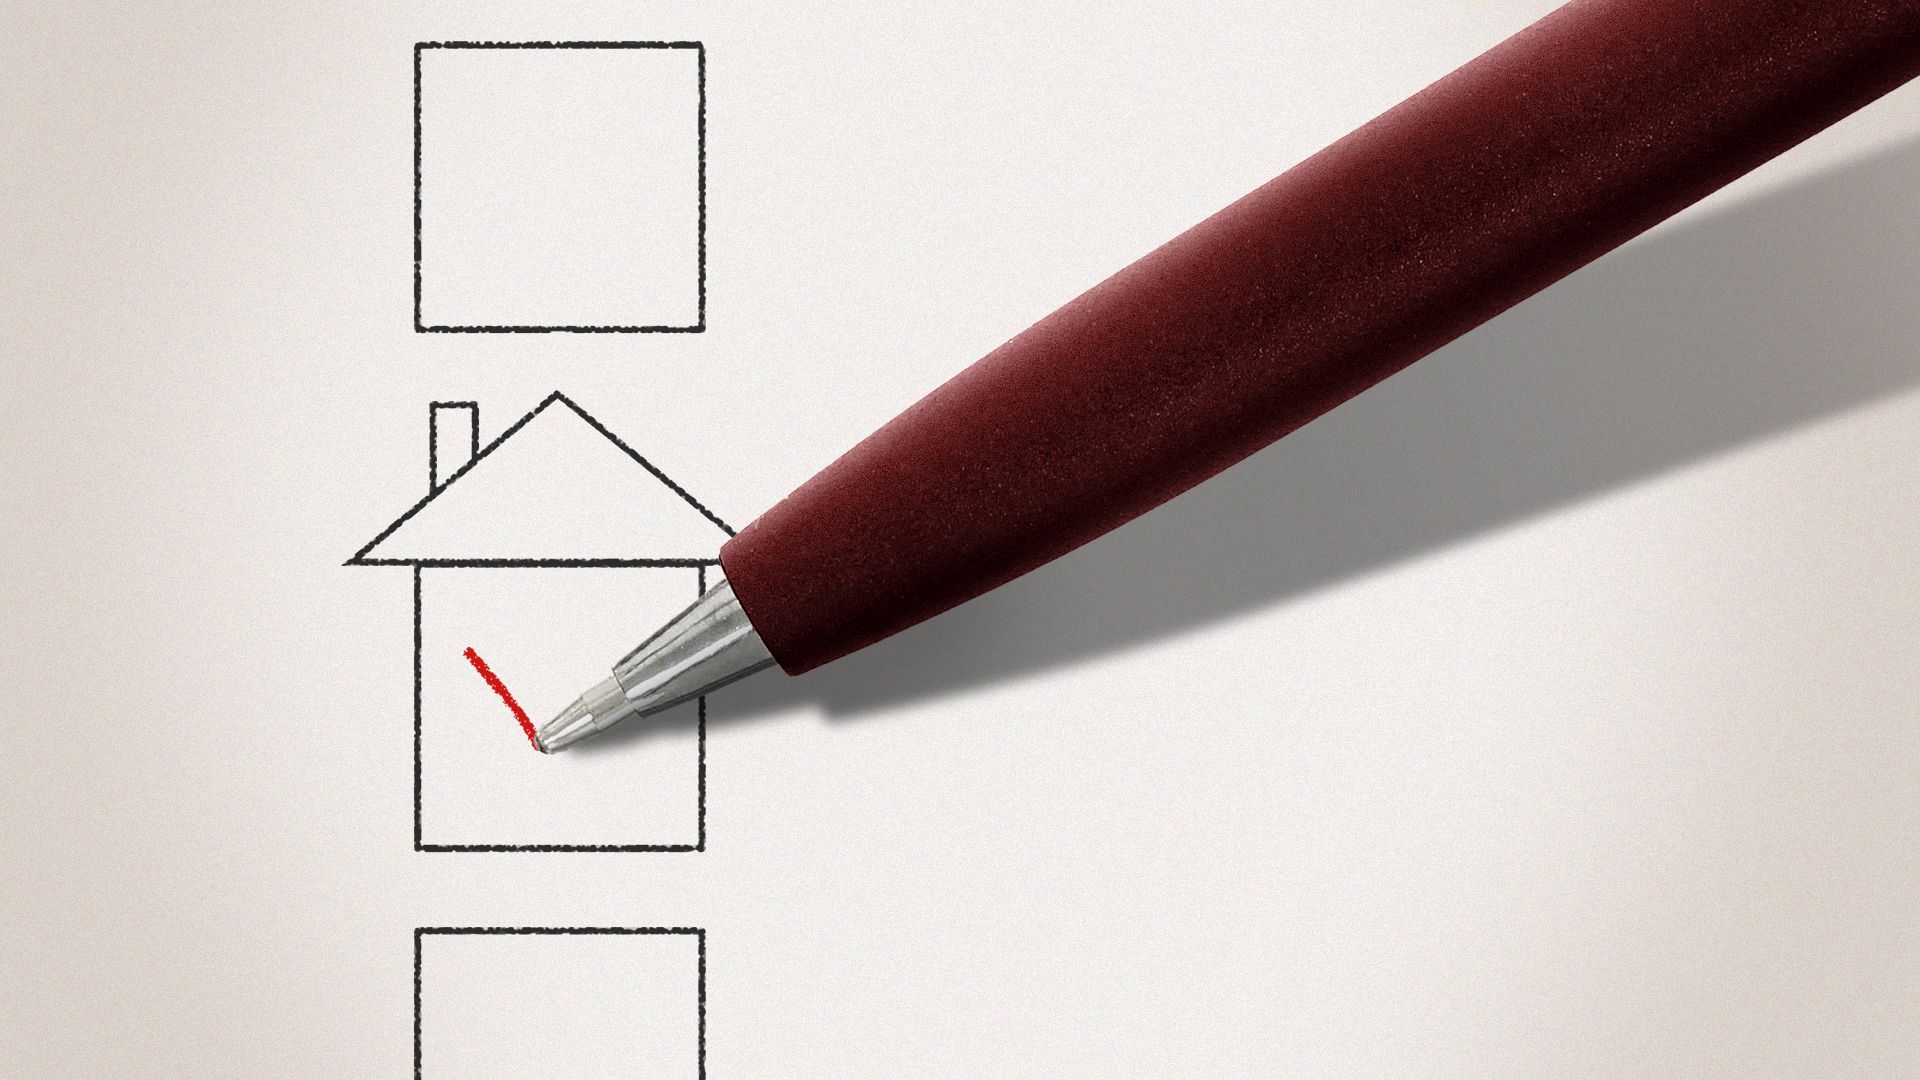 Illustration of a pen filling in a ballot checkbox in the shape of a house.